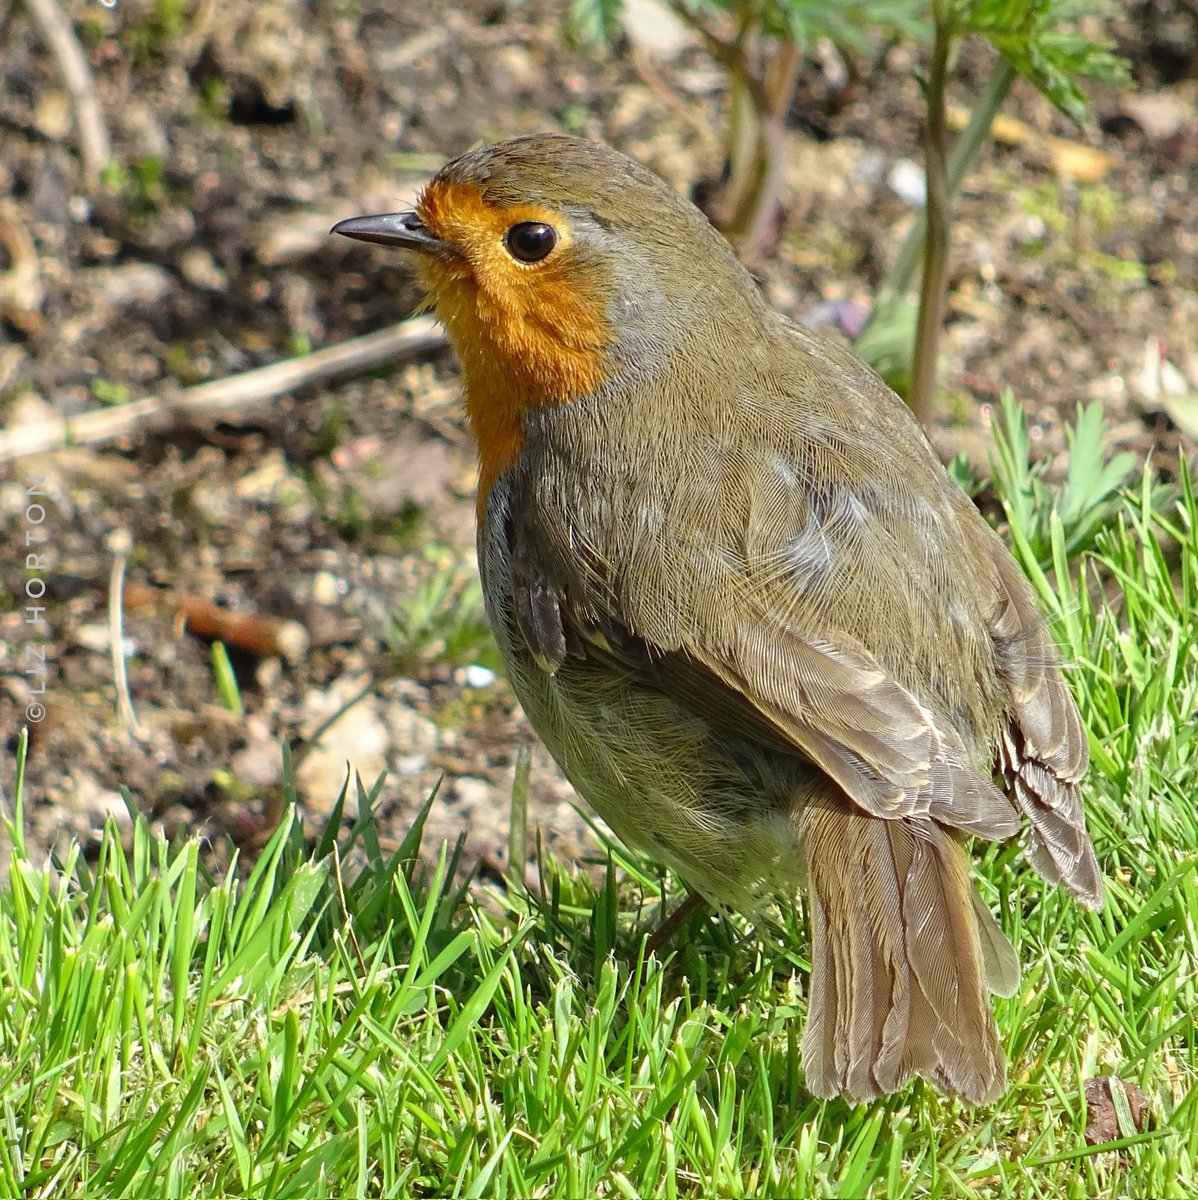 A #precious glance..
From a lovely #robin..
'Some things are more precious because they don't last long.'
Oscar Wilde #quote
#thoughtoftheday
#nature #wildlife #photography
#birdwatching #birdphotography
#BirdTwitter #birdtonic
Have a lovely day..
#art #naturelovers .. 🌱🧡🕊